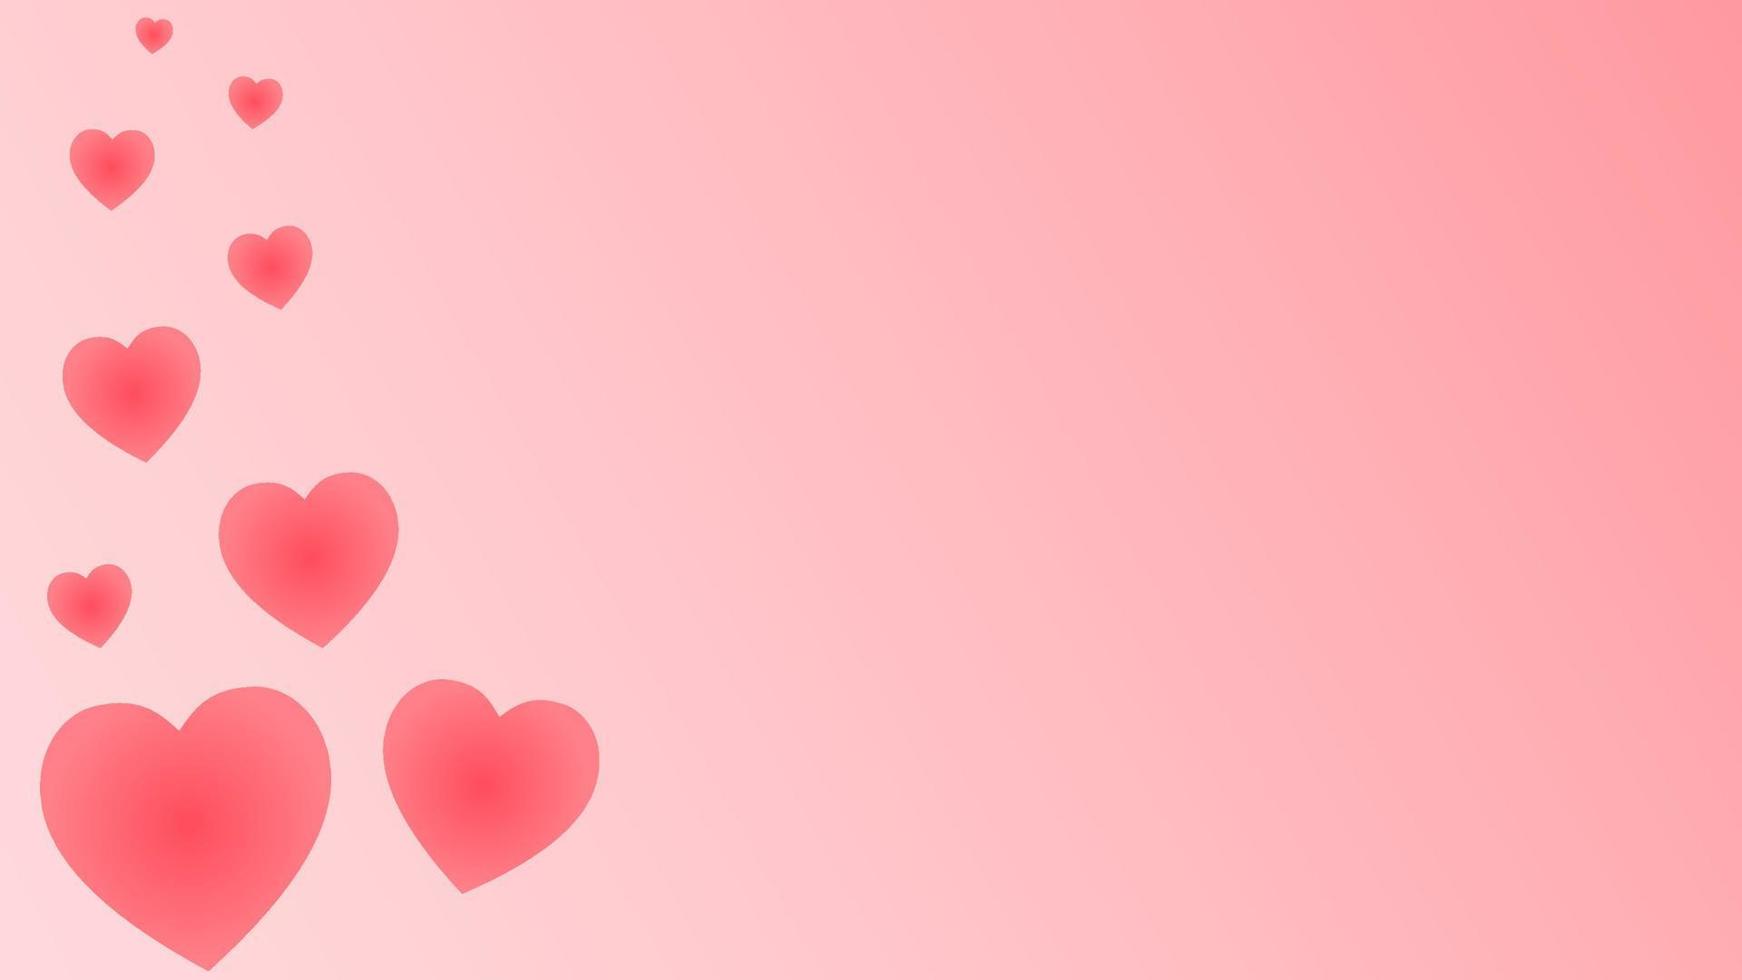 Heart vector on pink lover background illustration vector concept